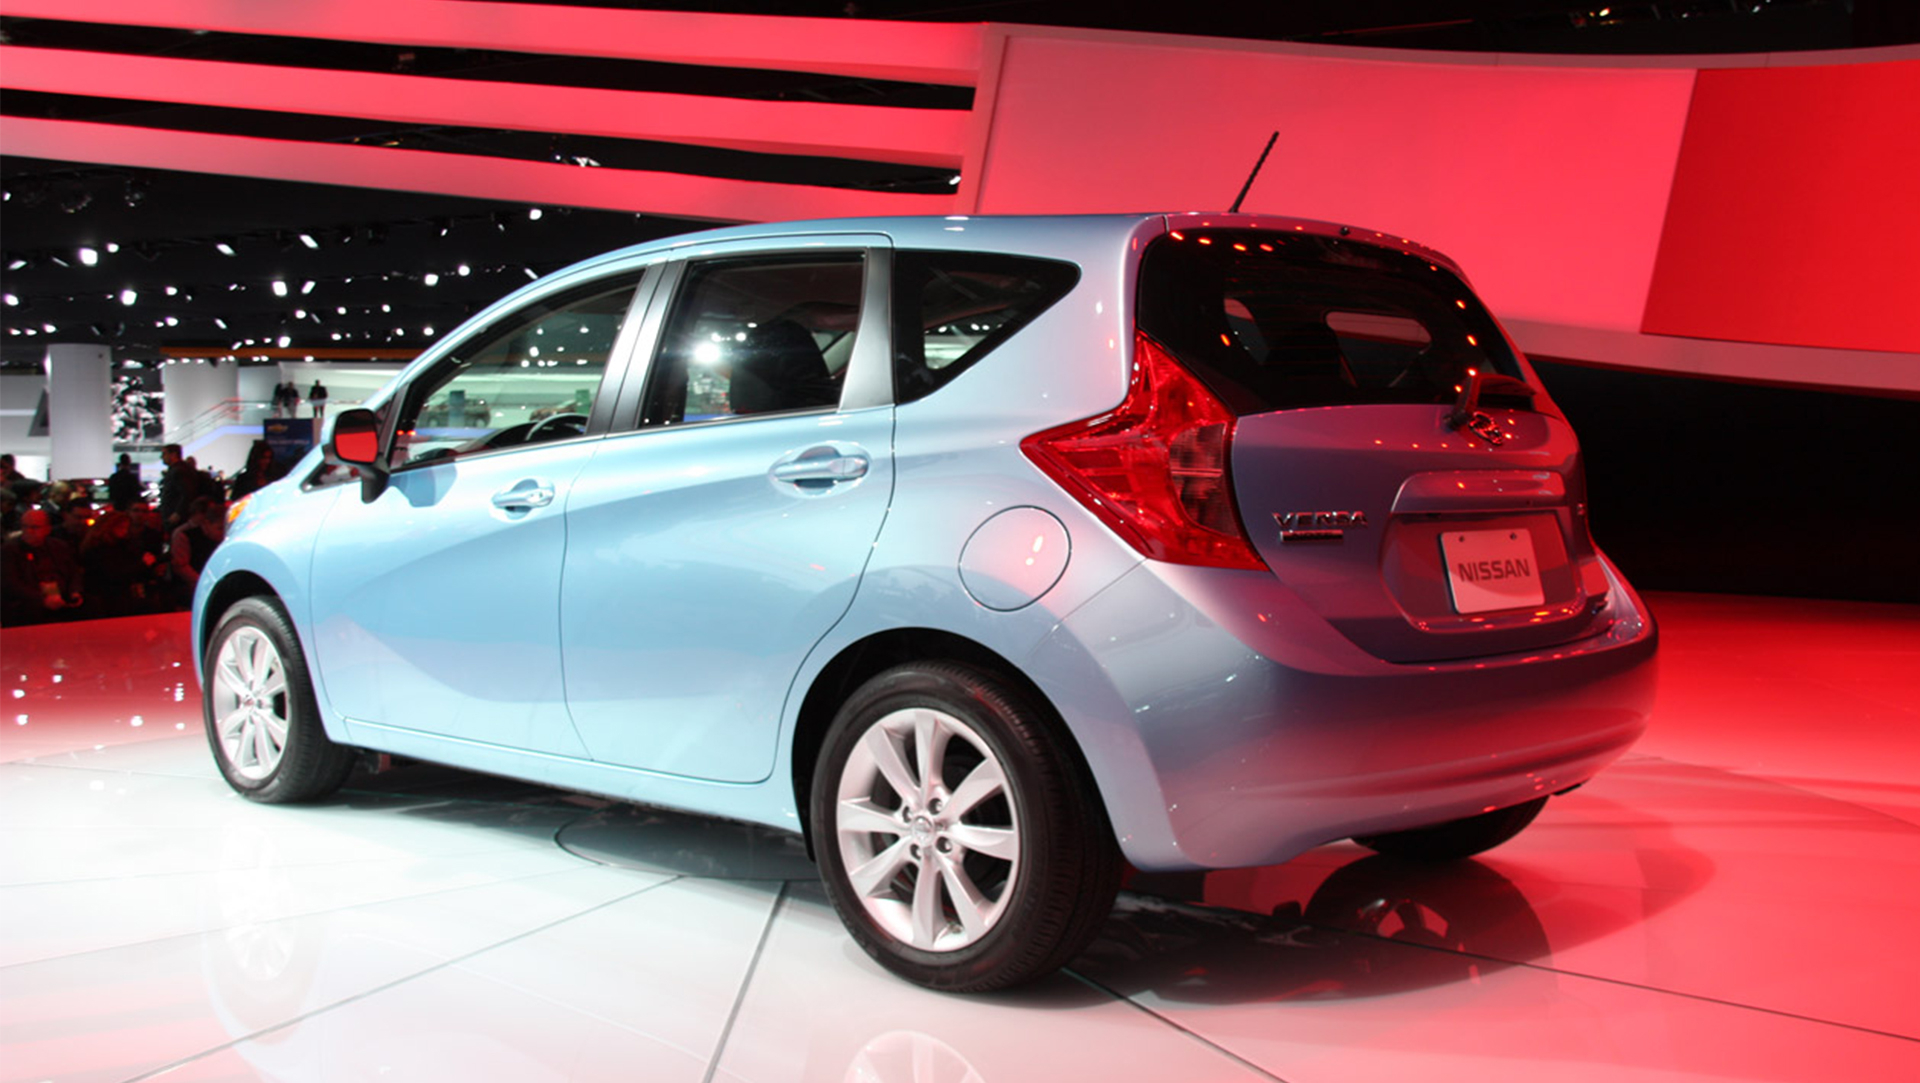 Nissan note 2016. Nissan Note 2018. Ниссан ноут 2018. Nissan Versa Note 2013. Ниссан ноут 2020.